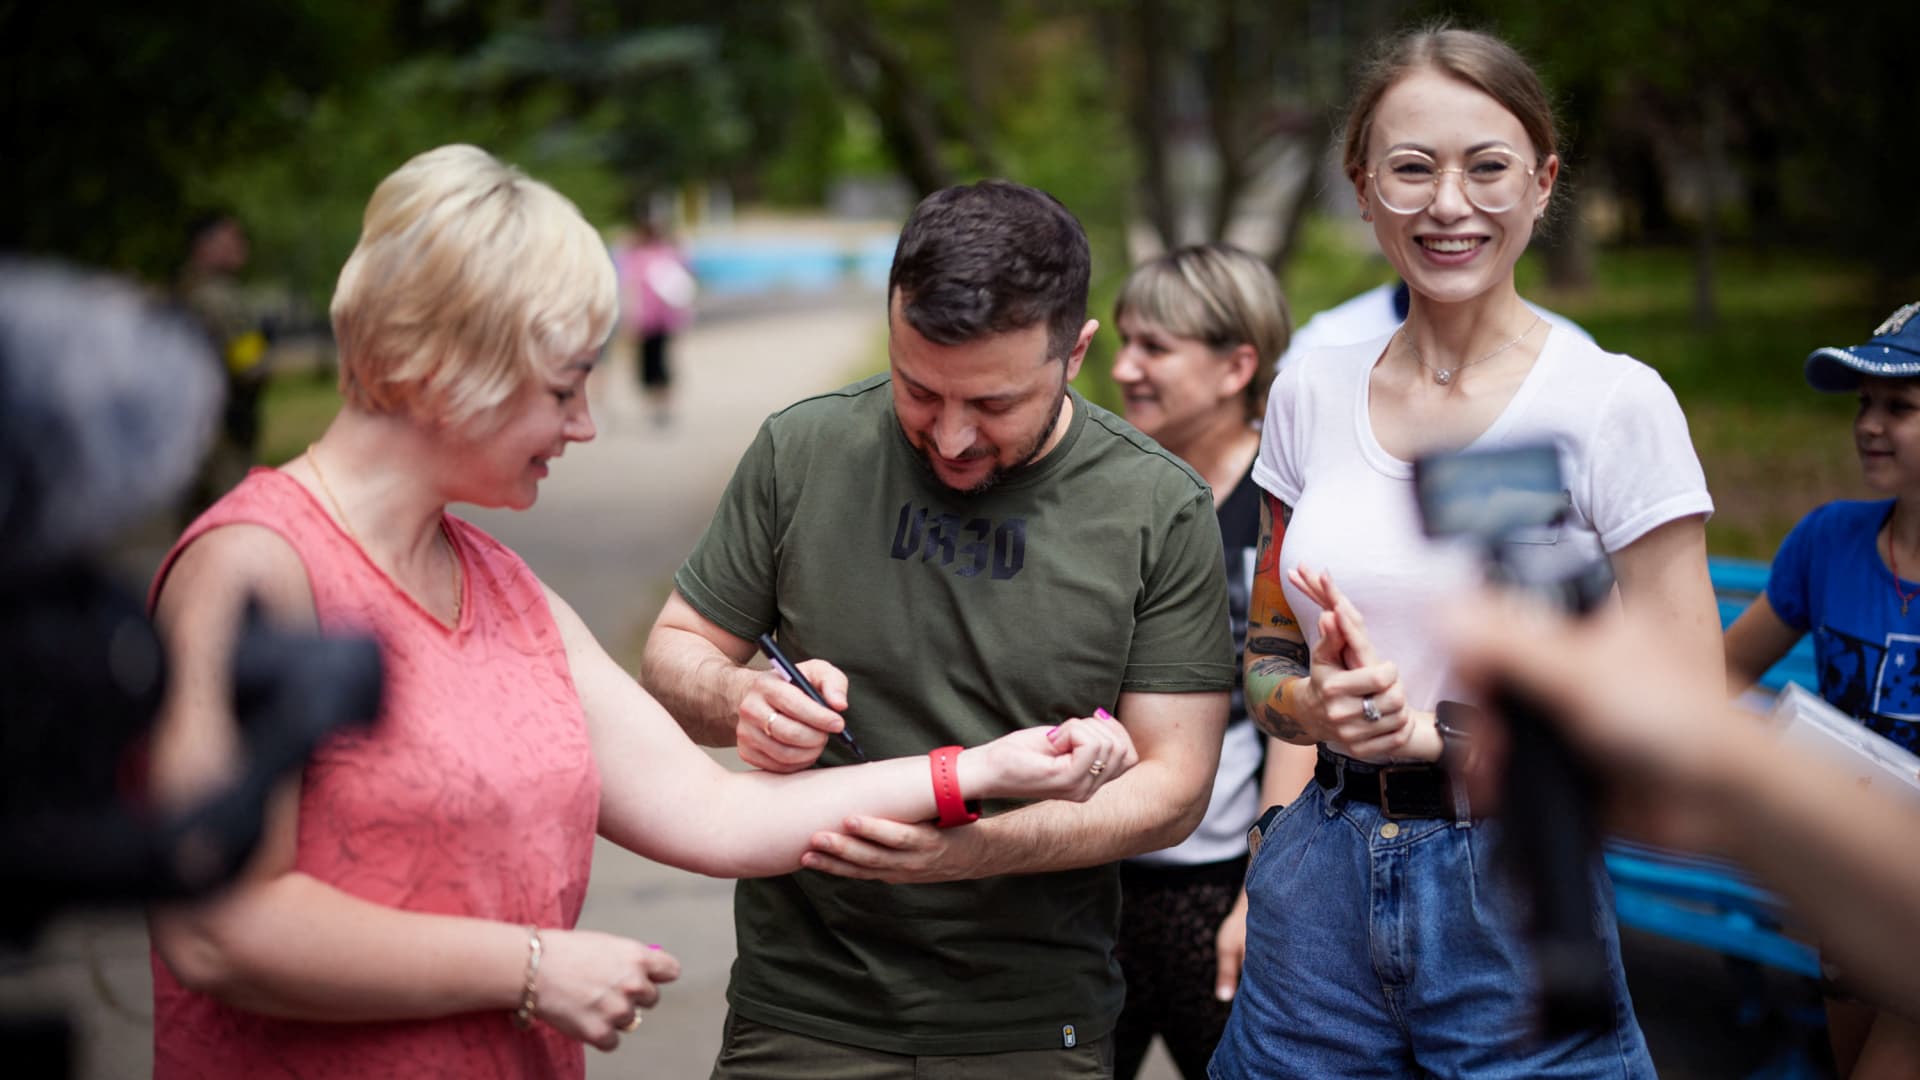 Ukraine's President Volodymyr Zelenskyy lefts a sign on an arm of his supporter as he attends a meeting with internally displaced people from Mariupol, amid Russia's attack on Ukraine continues, in Zaporizhzhia region, Ukraine June 5, 2022.